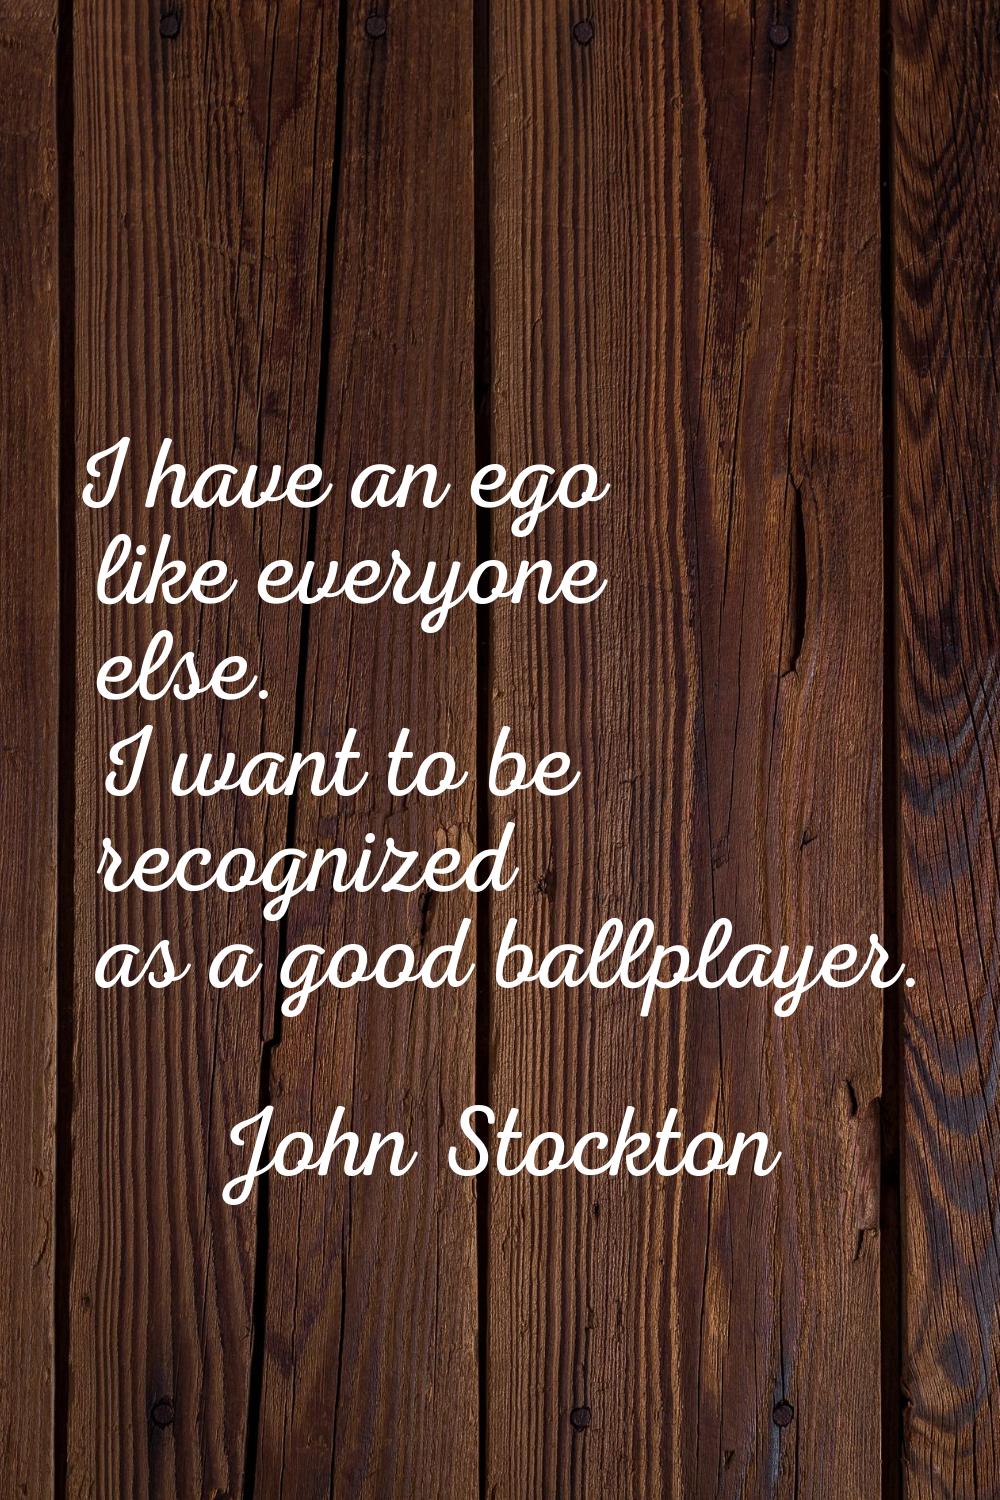 I have an ego like everyone else. I want to be recognized as a good ballplayer.